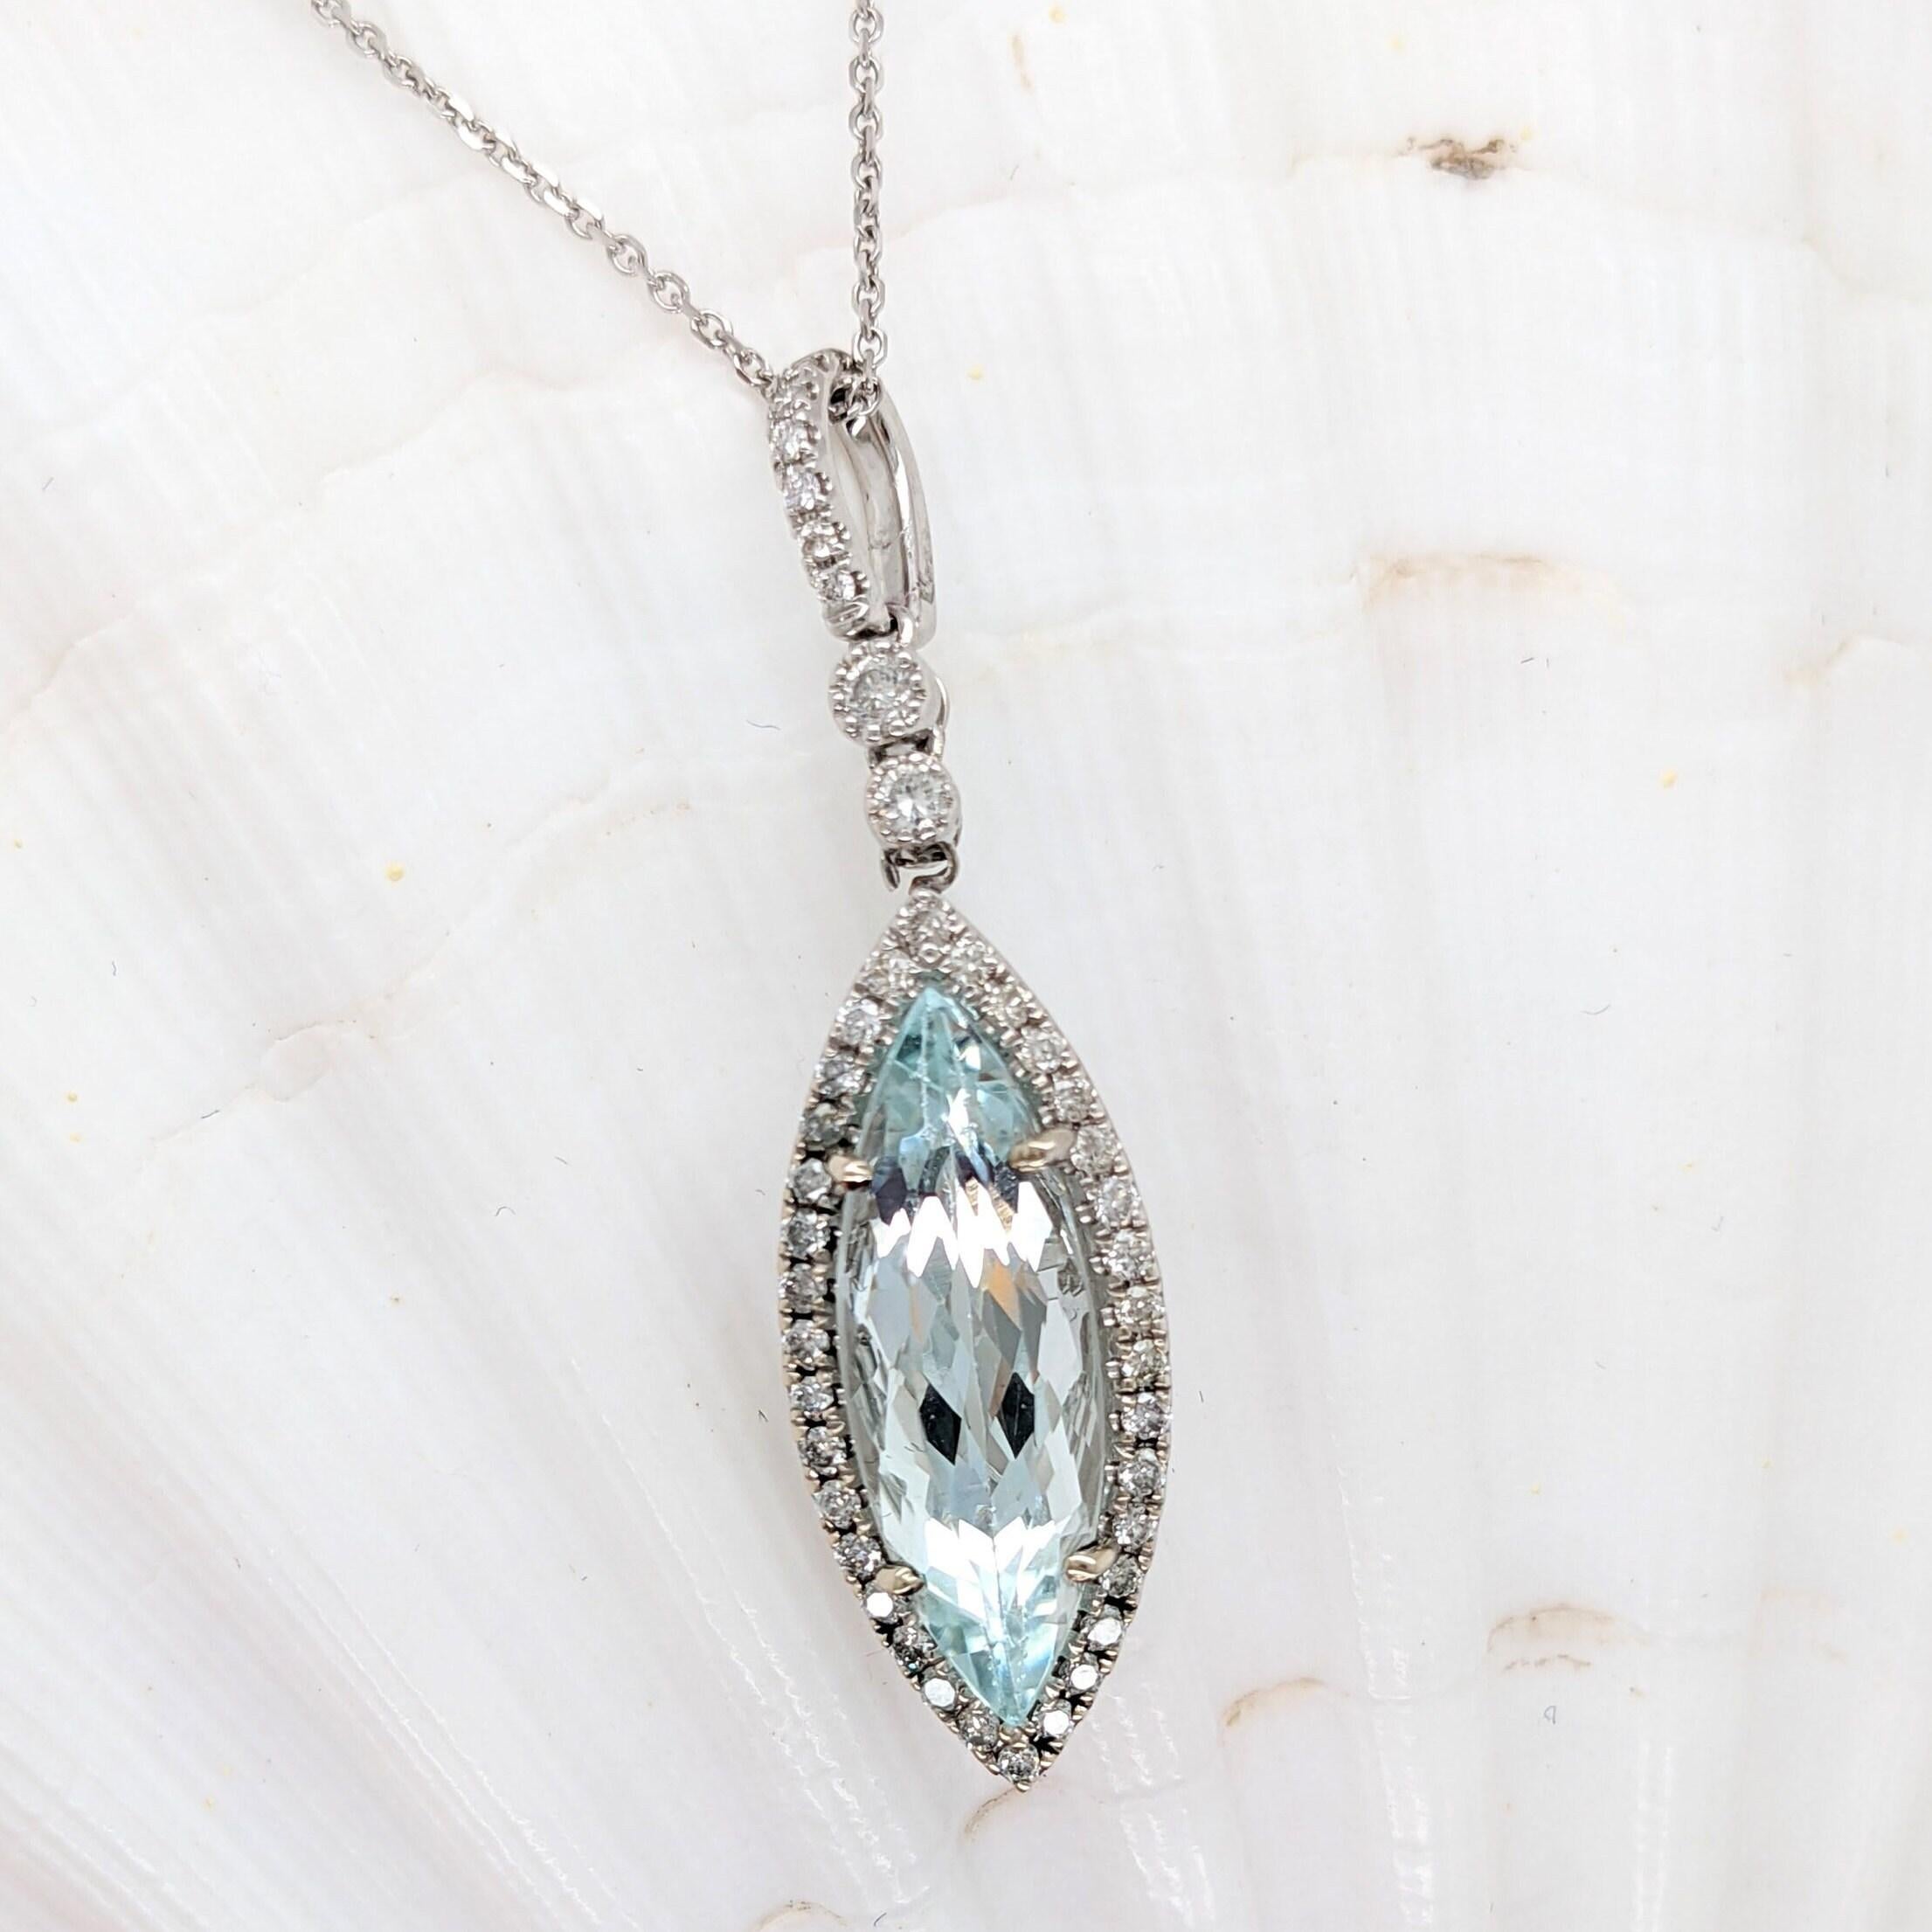 Specifications:

Item Type: Pendant
Gold Purity: 14k
Gold weight: 2.66 grams
Diamond: 42 diamonds totaling 0.36 cts

Stone Specs:
Type: Aquamarine
Weight: 3.26 cts
Shape: Marquise
Size: 19.5x6.5mm
Treatment: Heated
Hardness: 7.5-8

This pendant is